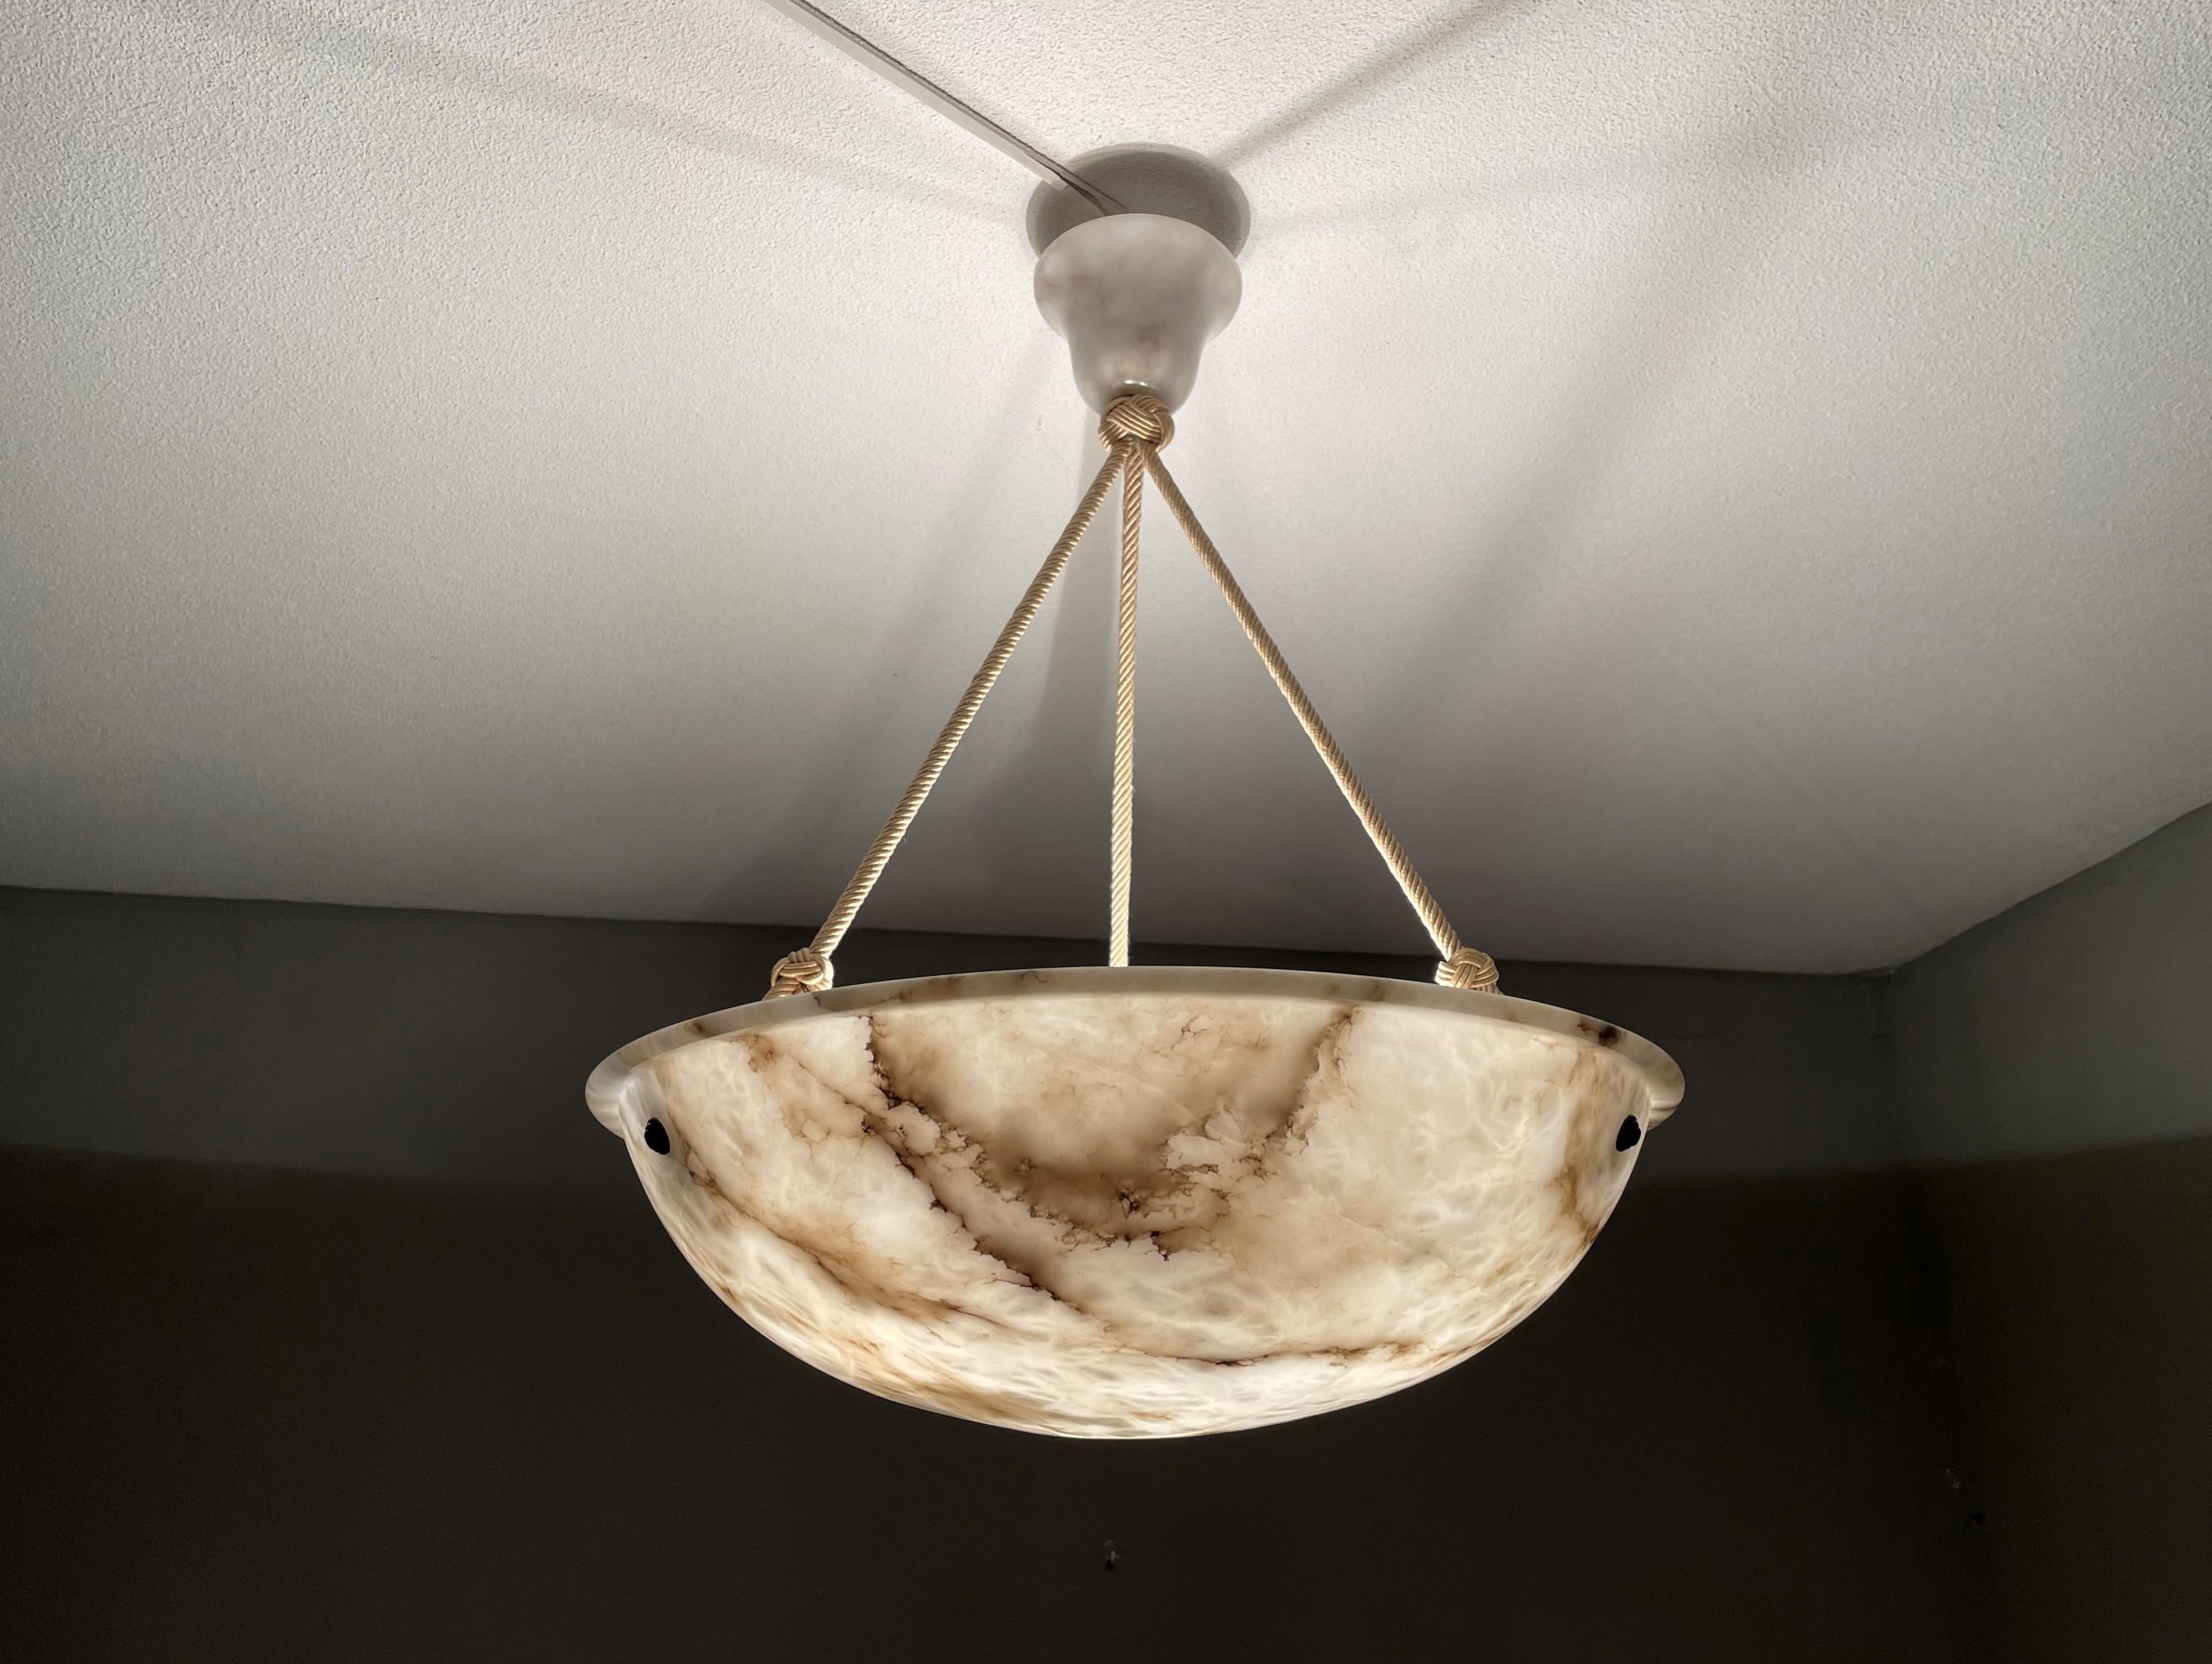 Top class antique pendant with a striking alabaster shade of 19.7 inches in diameter.

Thanks to its large size and excellent condition this timeless alabaster chandelier is bound to light up someones days and evenings soon. Because of their